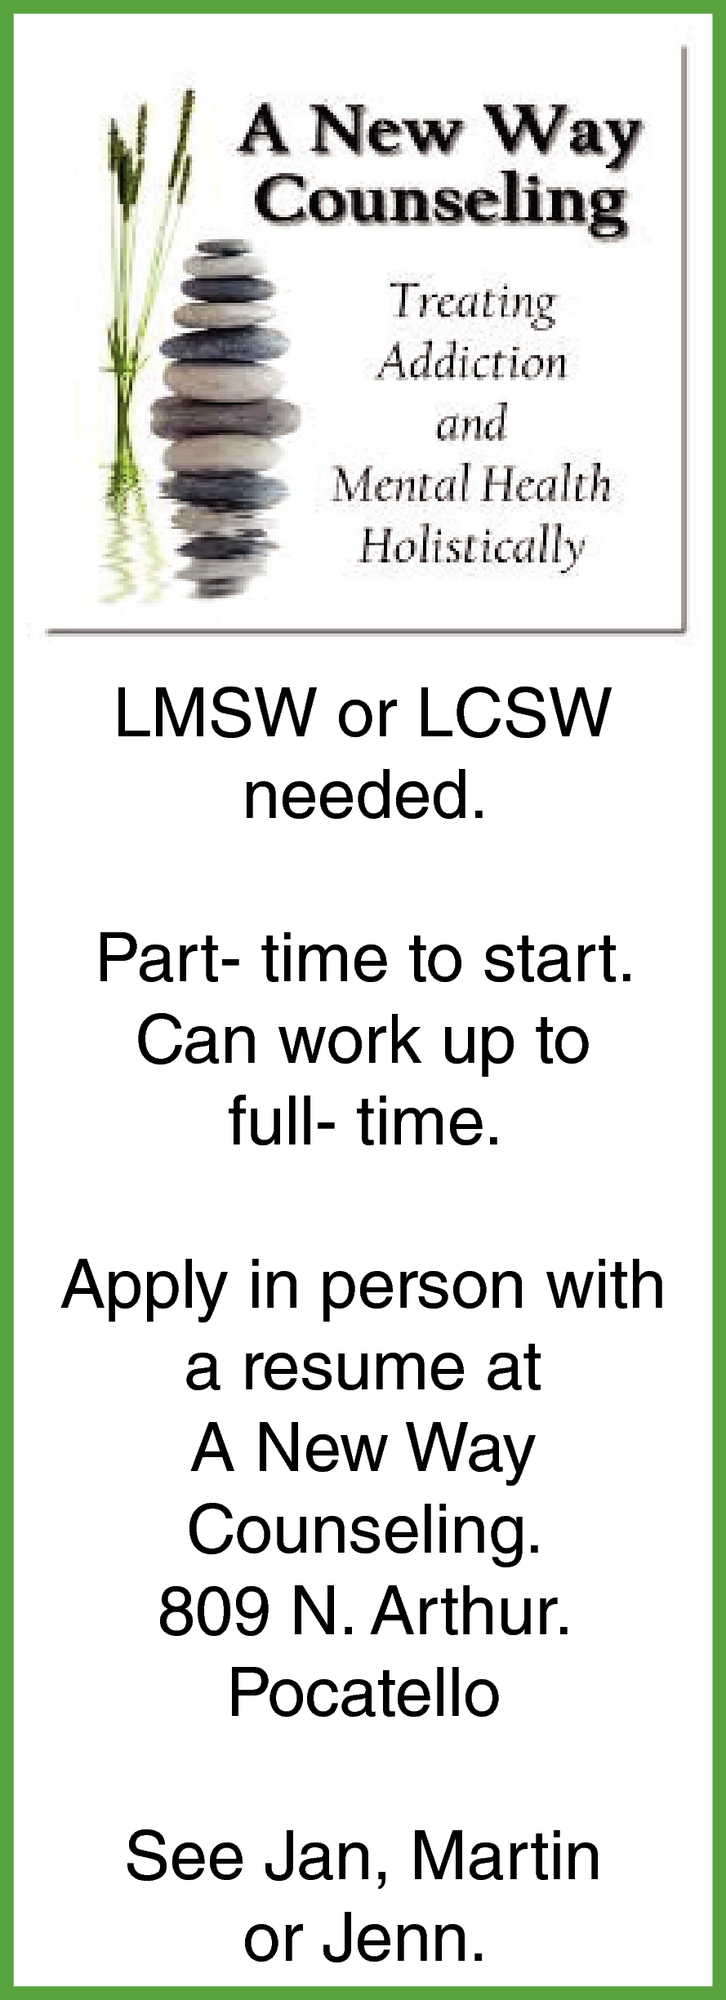 LMSW or LCSW needed. Part- time to